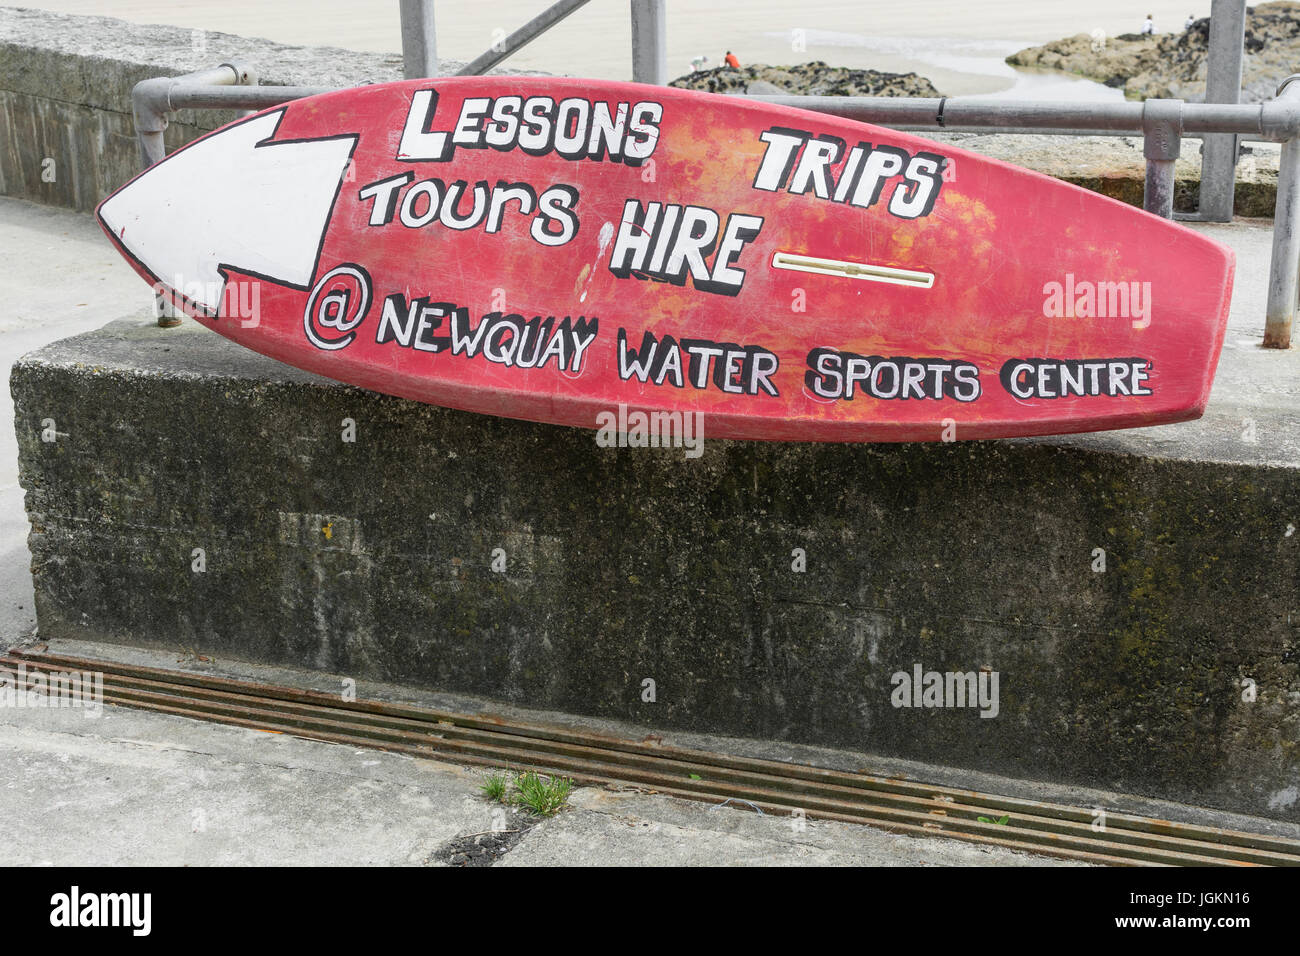 Old surfboard utilised as an advertising hoarding for a surfboard hire and surfing lessons business at Newquay harbour, Cornwall. Stock Photo